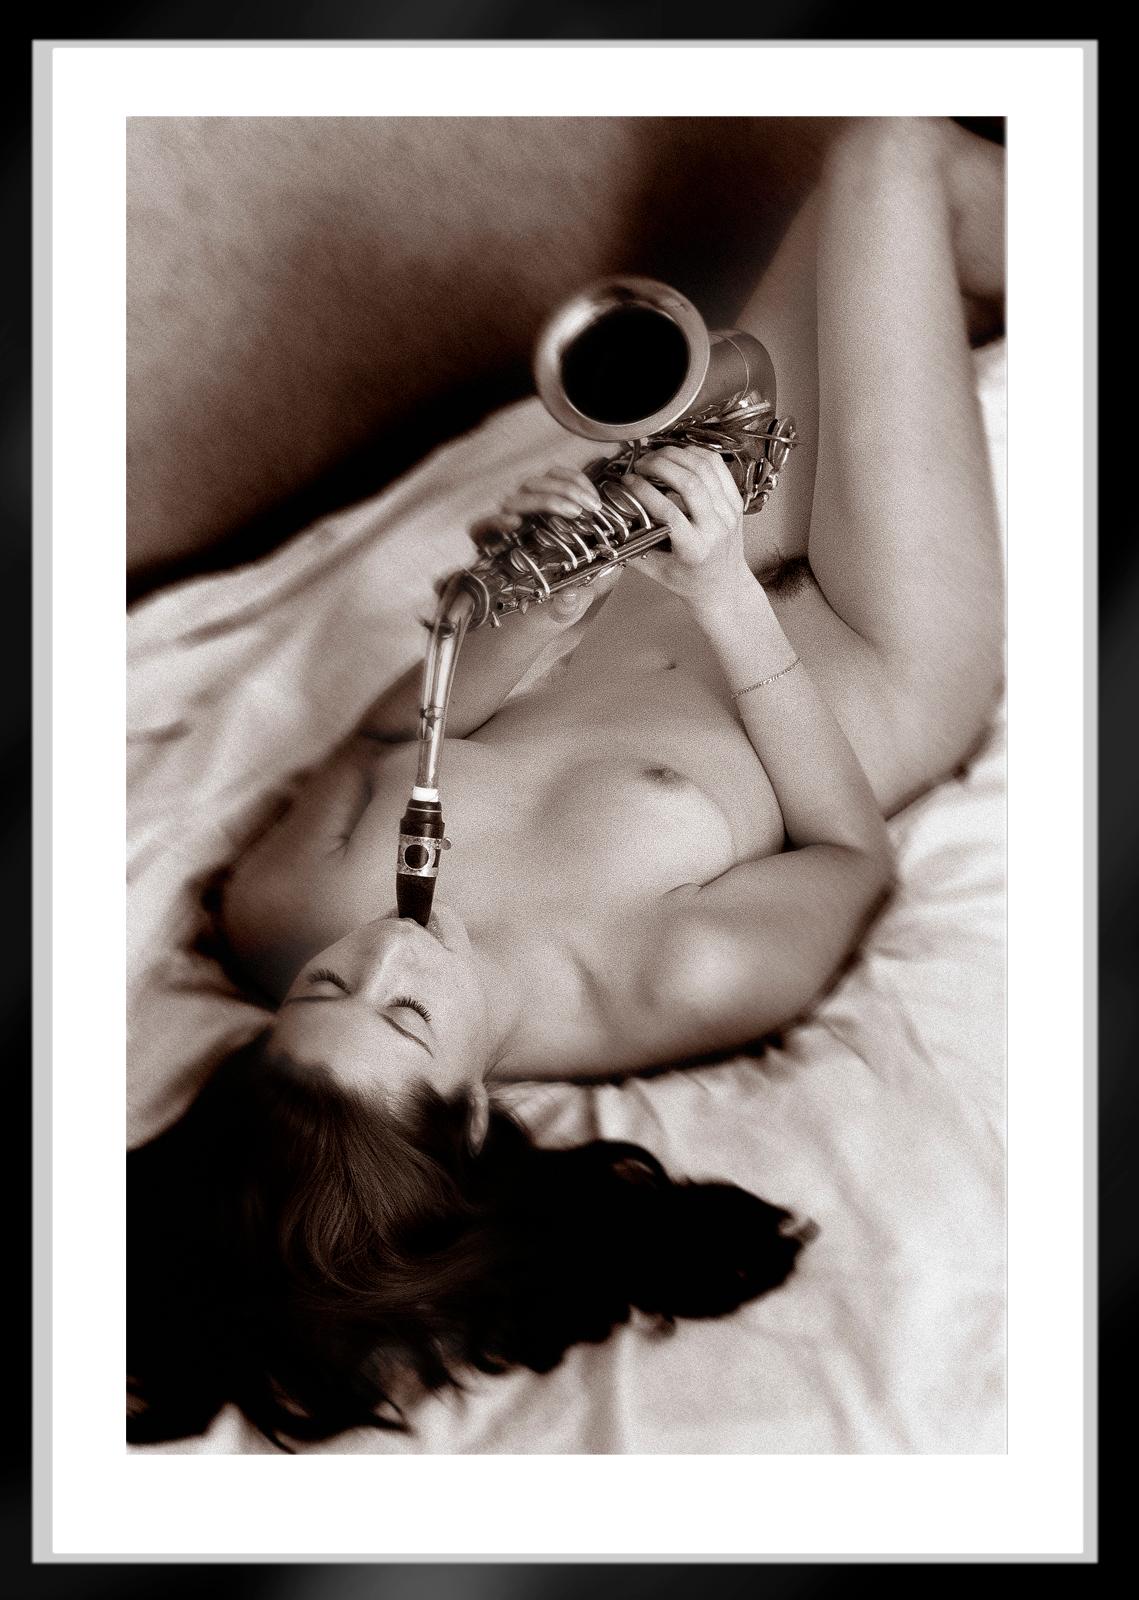 Sax - Signed limited edition fine art print, Contemporary, Nude Model in bed - Gray Nude Photograph by Ian Sanderson